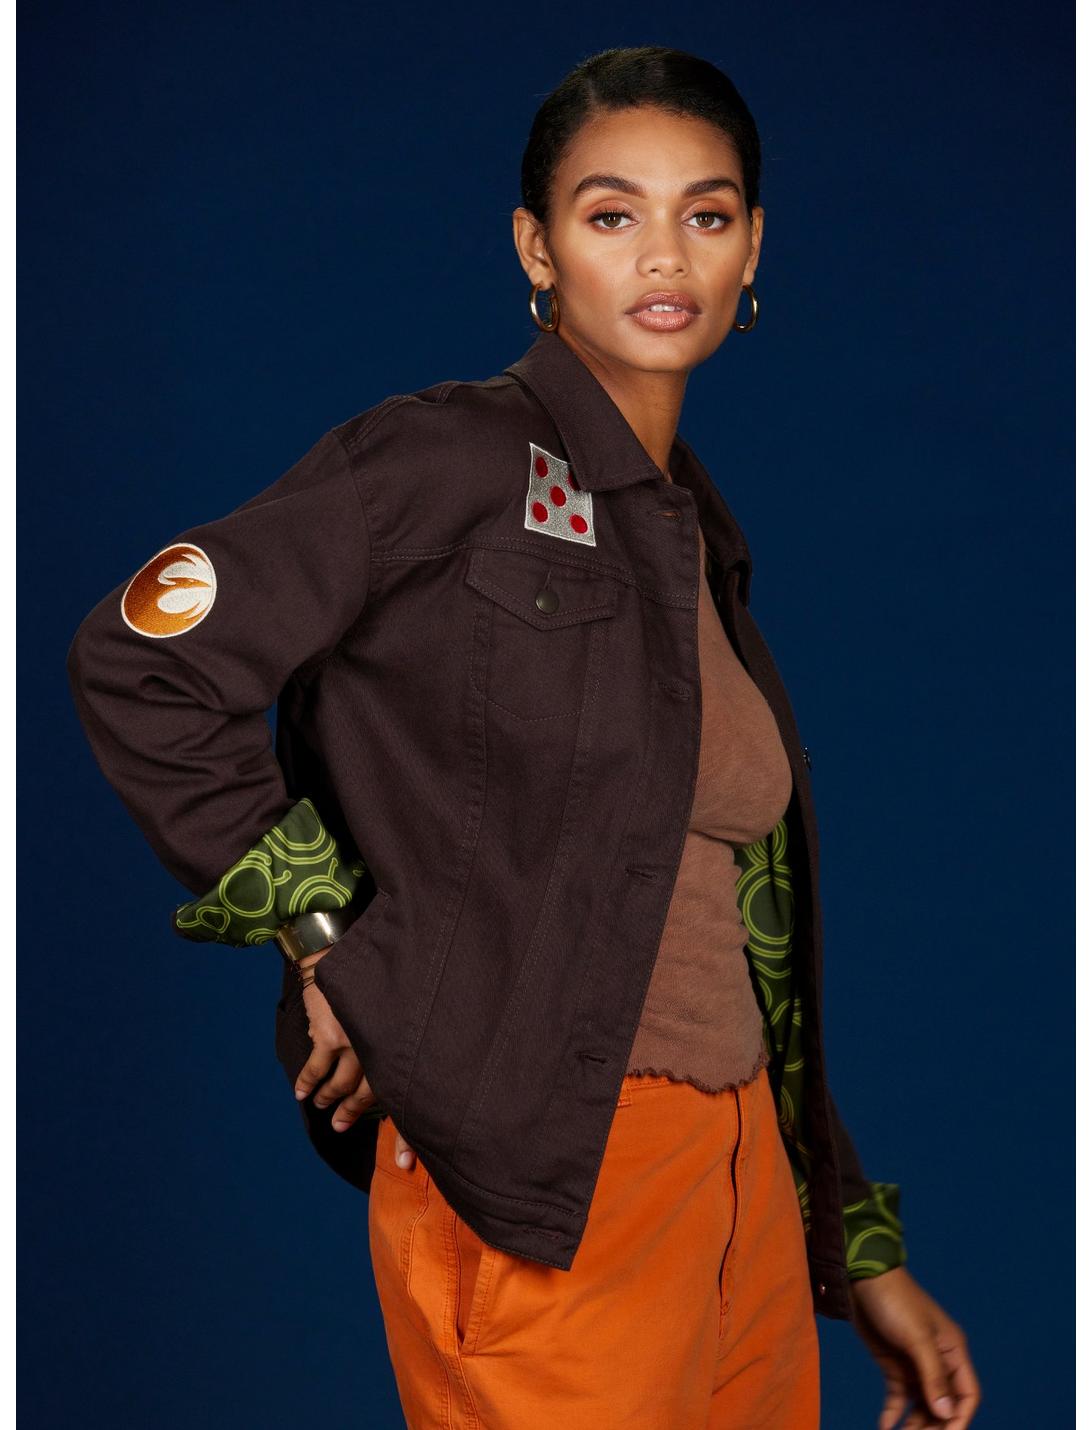 Her Universe Star Wars Ahsoka Hera Syndulla Patches Jacket Her Universe Exclusive, MULTI, hi-res